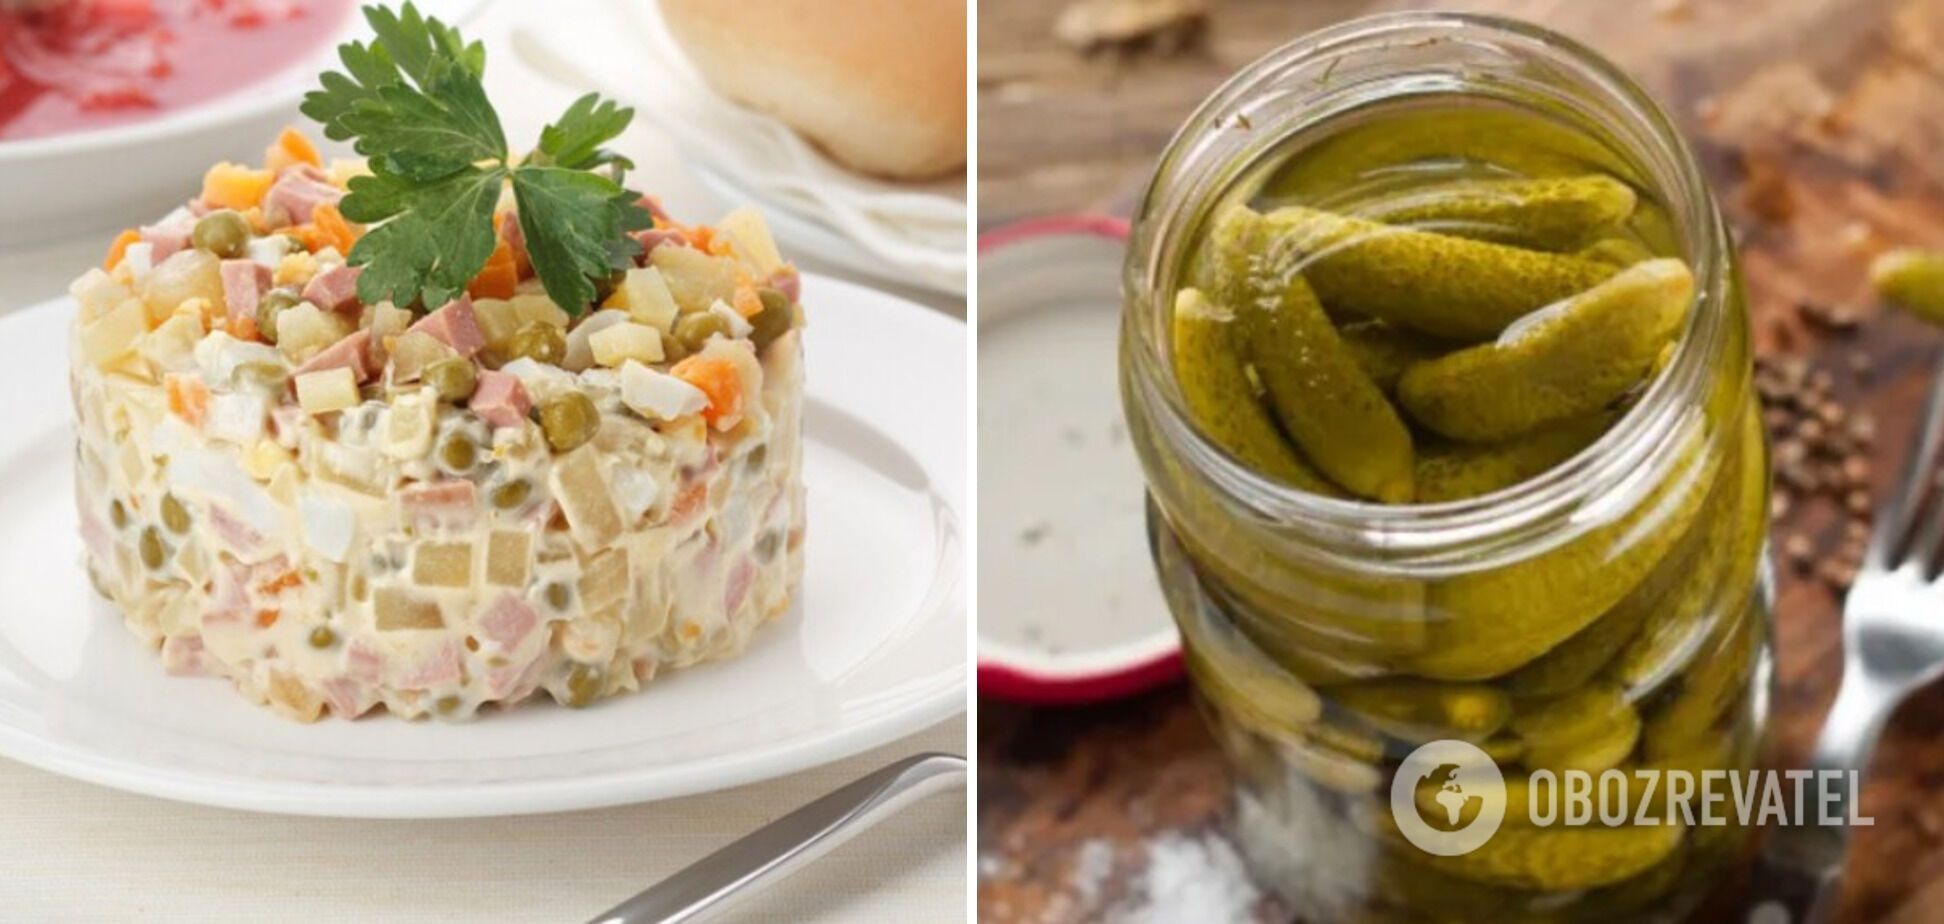 Why pickled cucumbers should not be added to Olivier